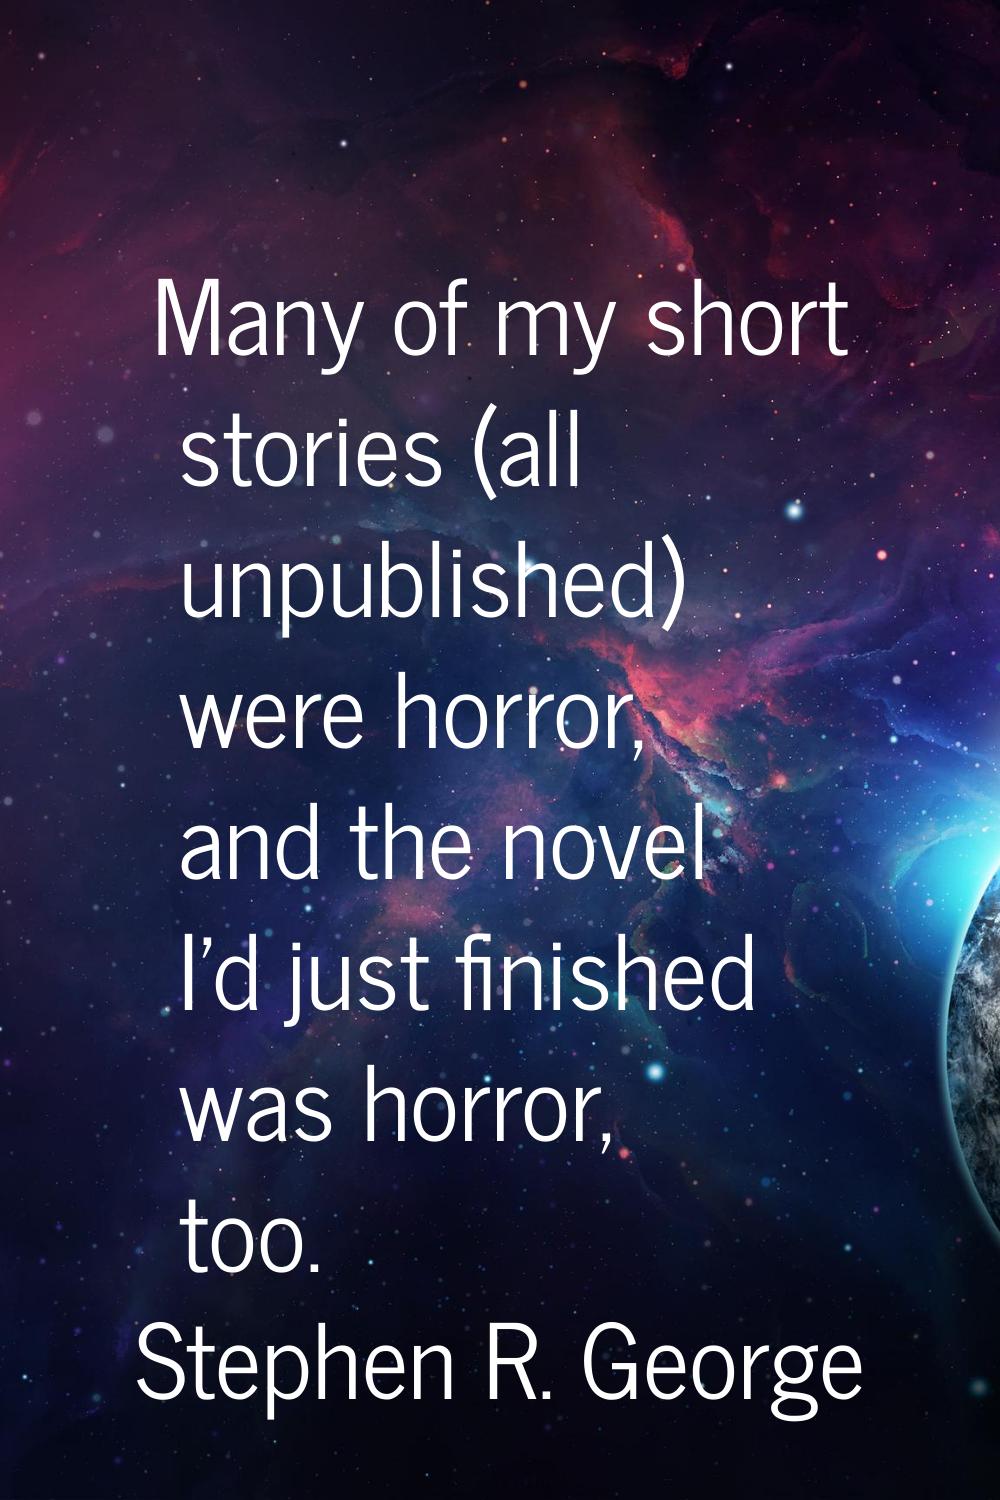 Many of my short stories (all unpublished) were horror, and the novel I'd just finished was horror,